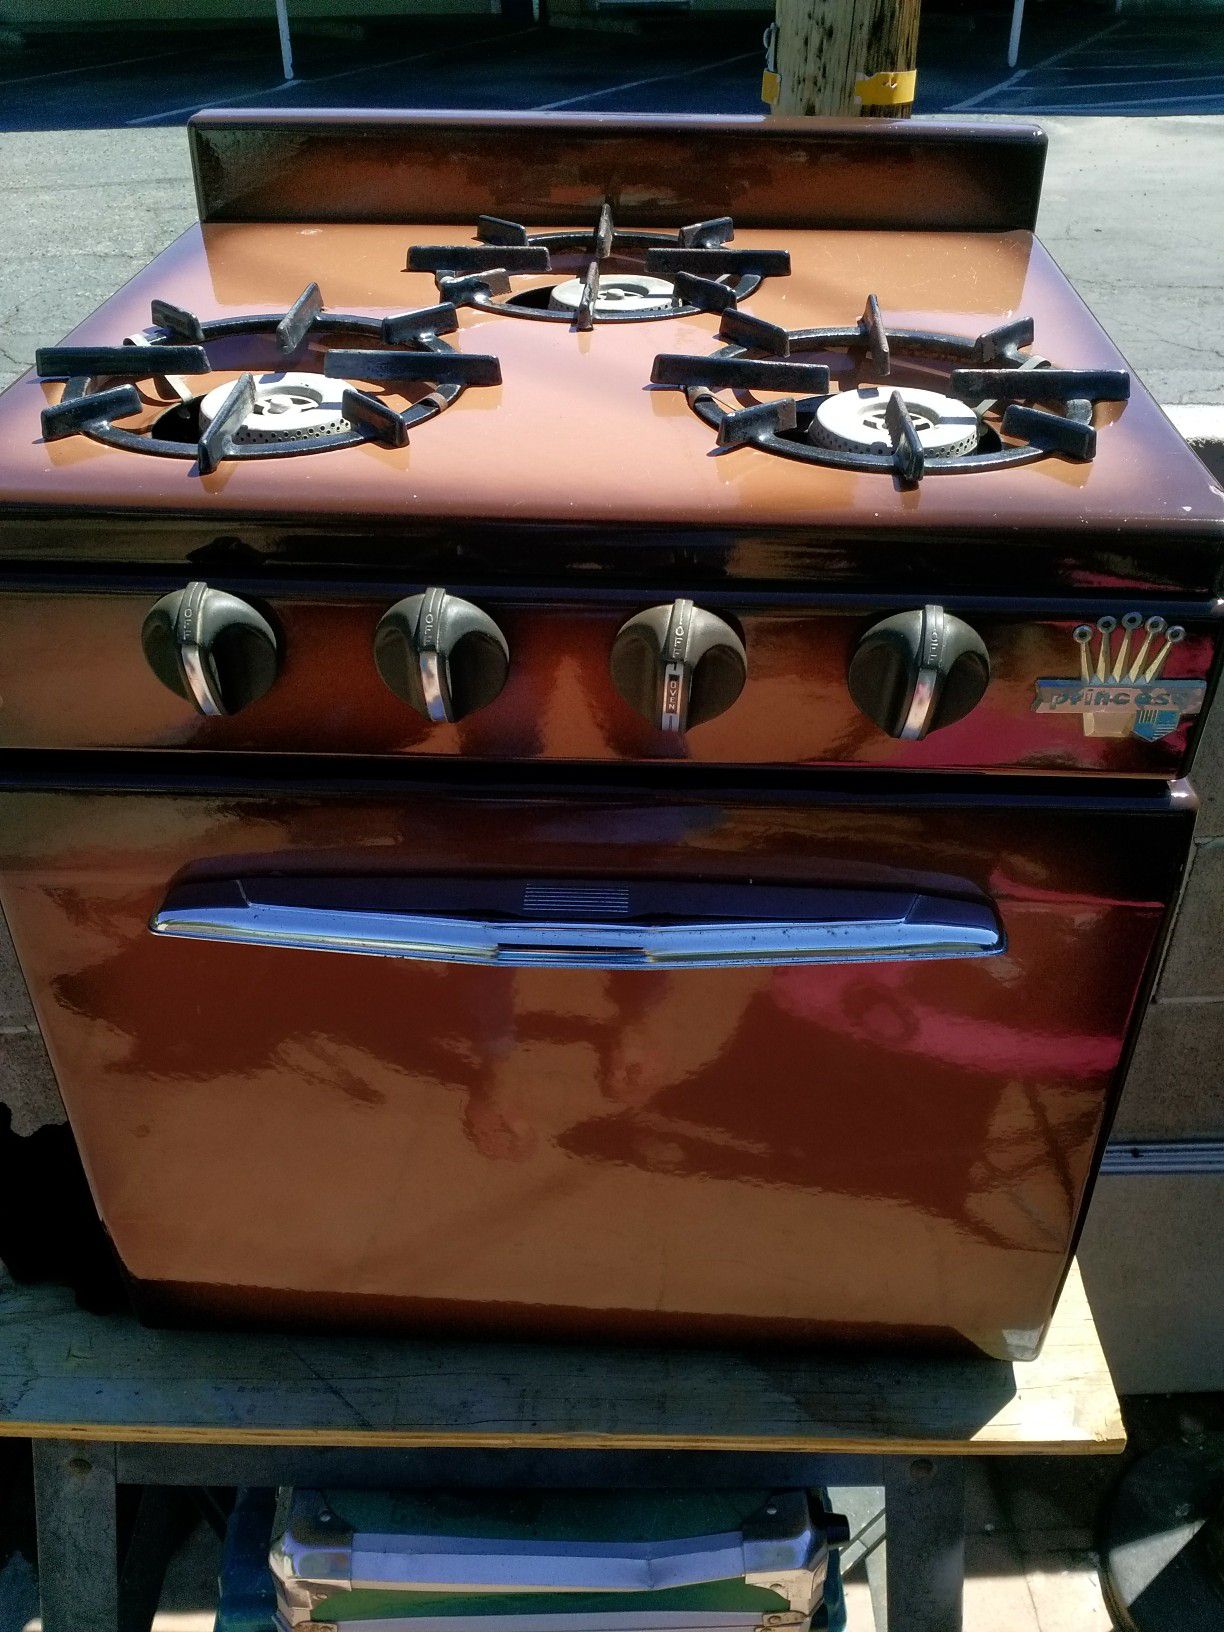 Older RV stove/oven works great